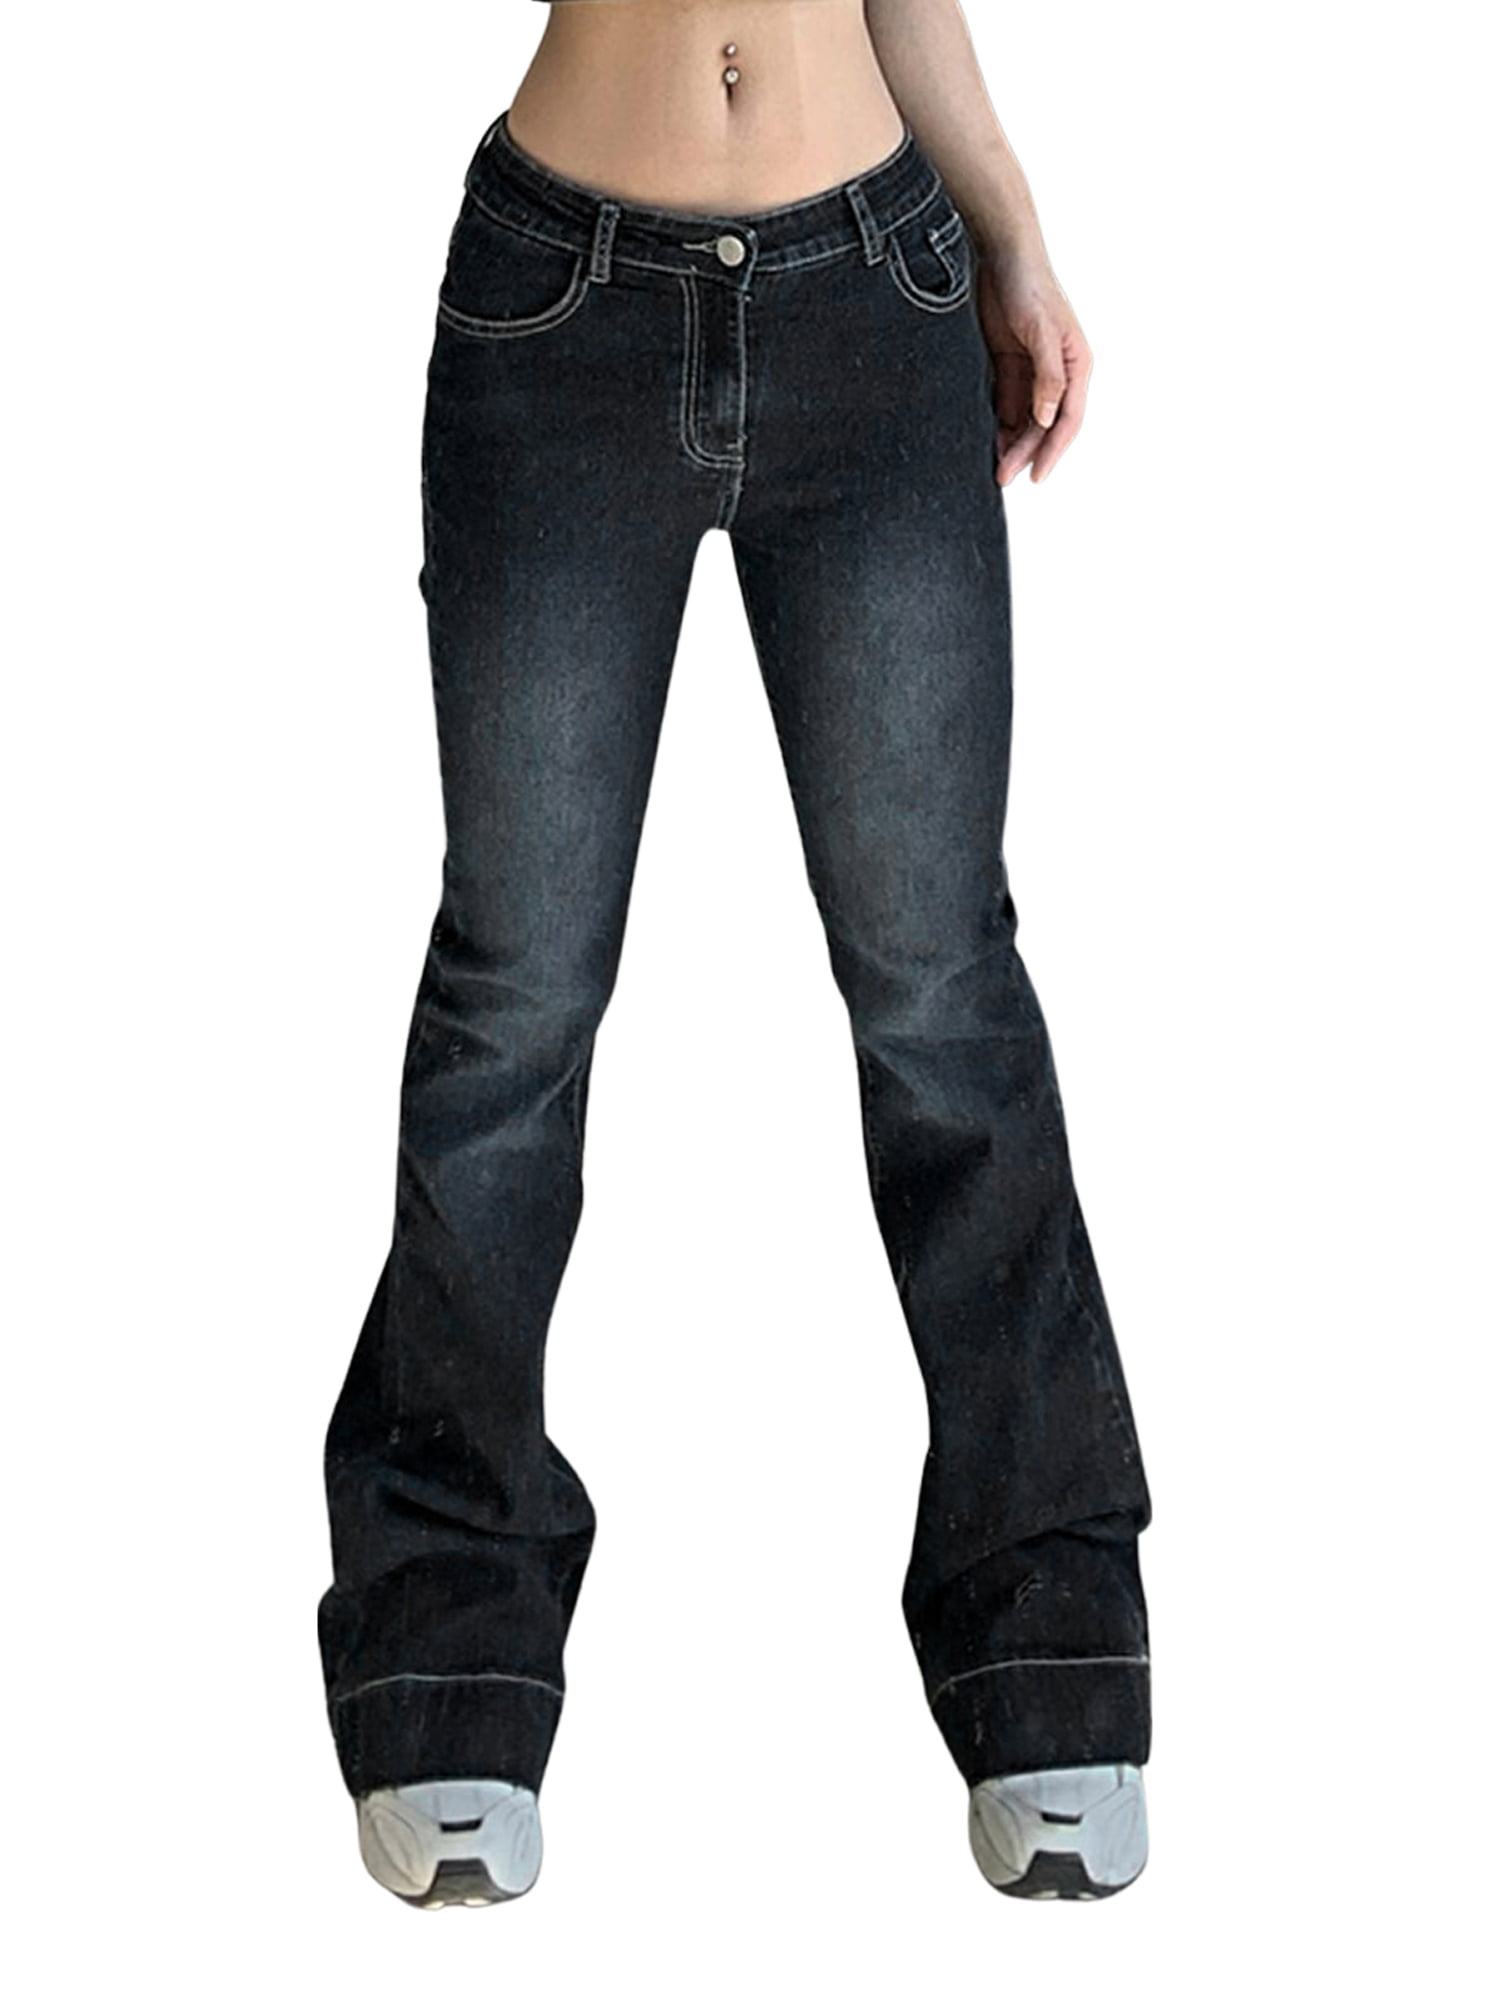 Women Spring Flared Jeans, Color Low-Waist Casual Bell-Bottomed Pants for Girls, Black, S/M/L - Walmart.com